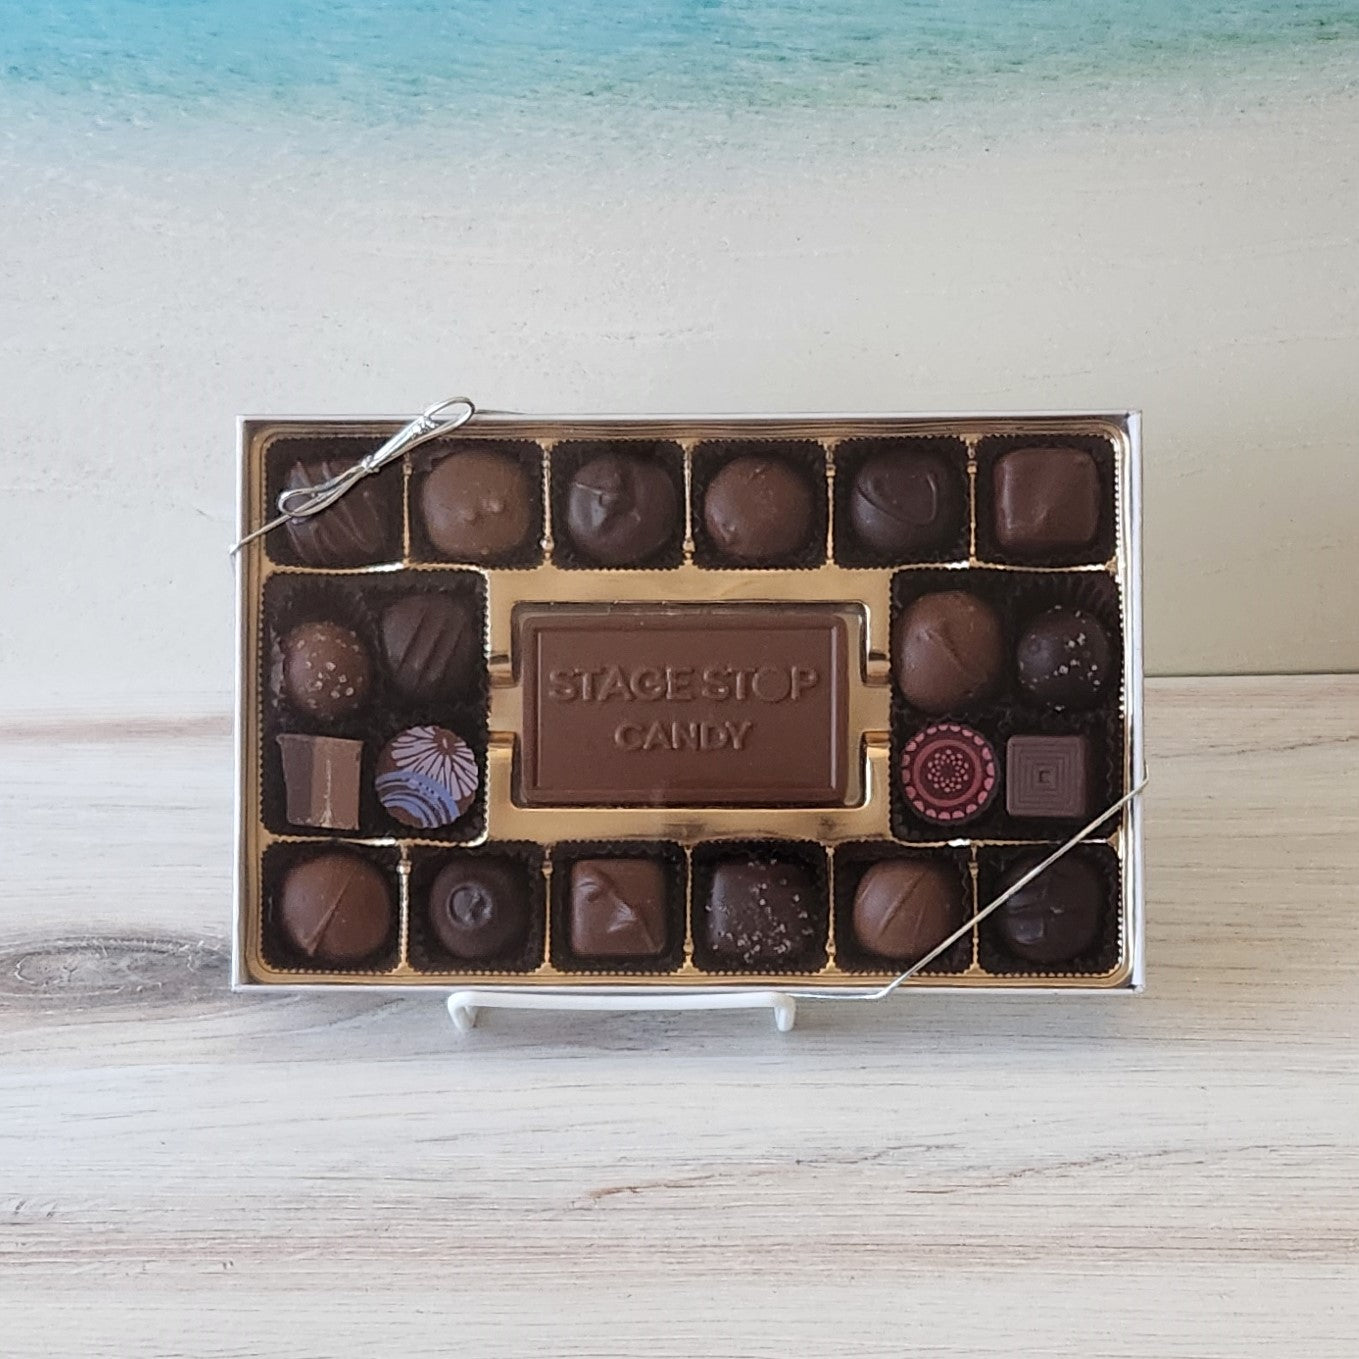 A 20 piece chocolate assortment filled with milk and dark chocolate soft centers, truffles, caramels and meltaways. In the middle of the box sits a solid milk chocolate bar embossed with the Stage Stop Candy logo. A perfect gift for anyone who loves Cape Cod.